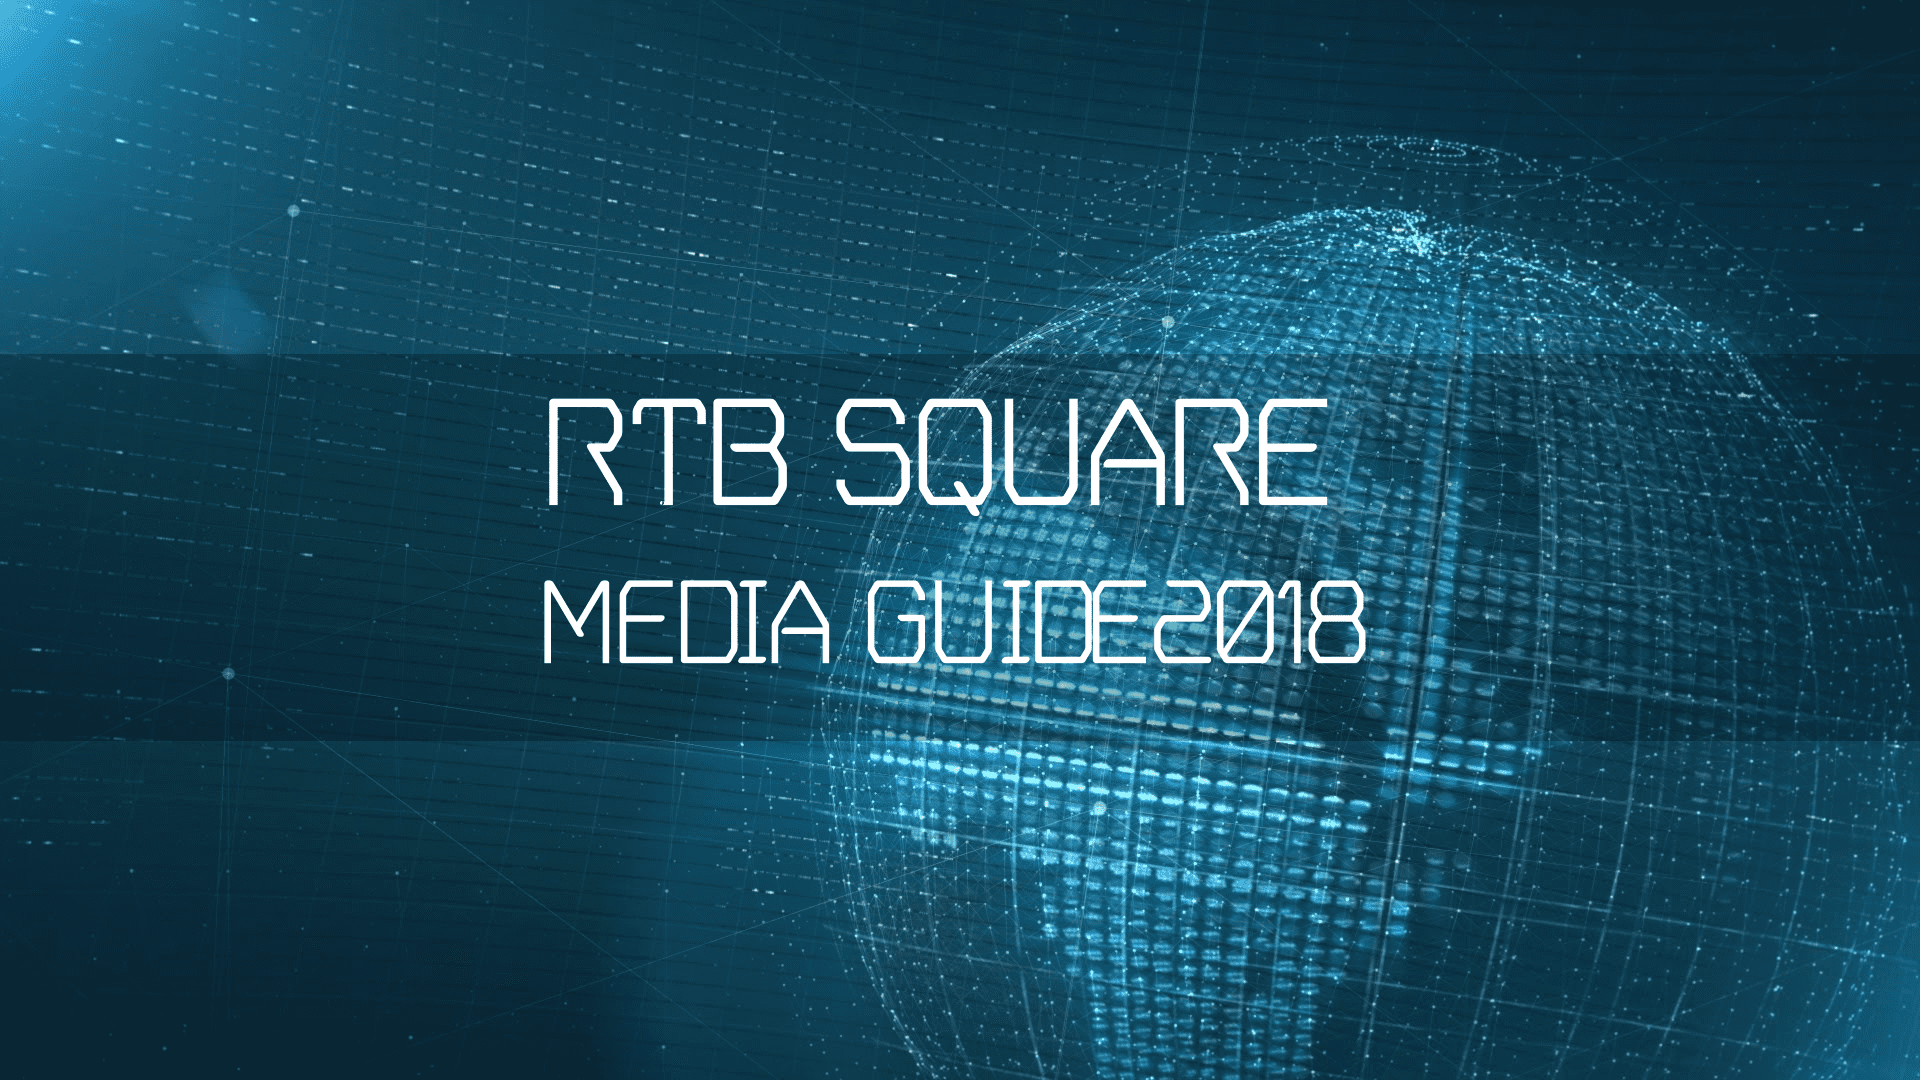 RTBSQUARE mediaguide